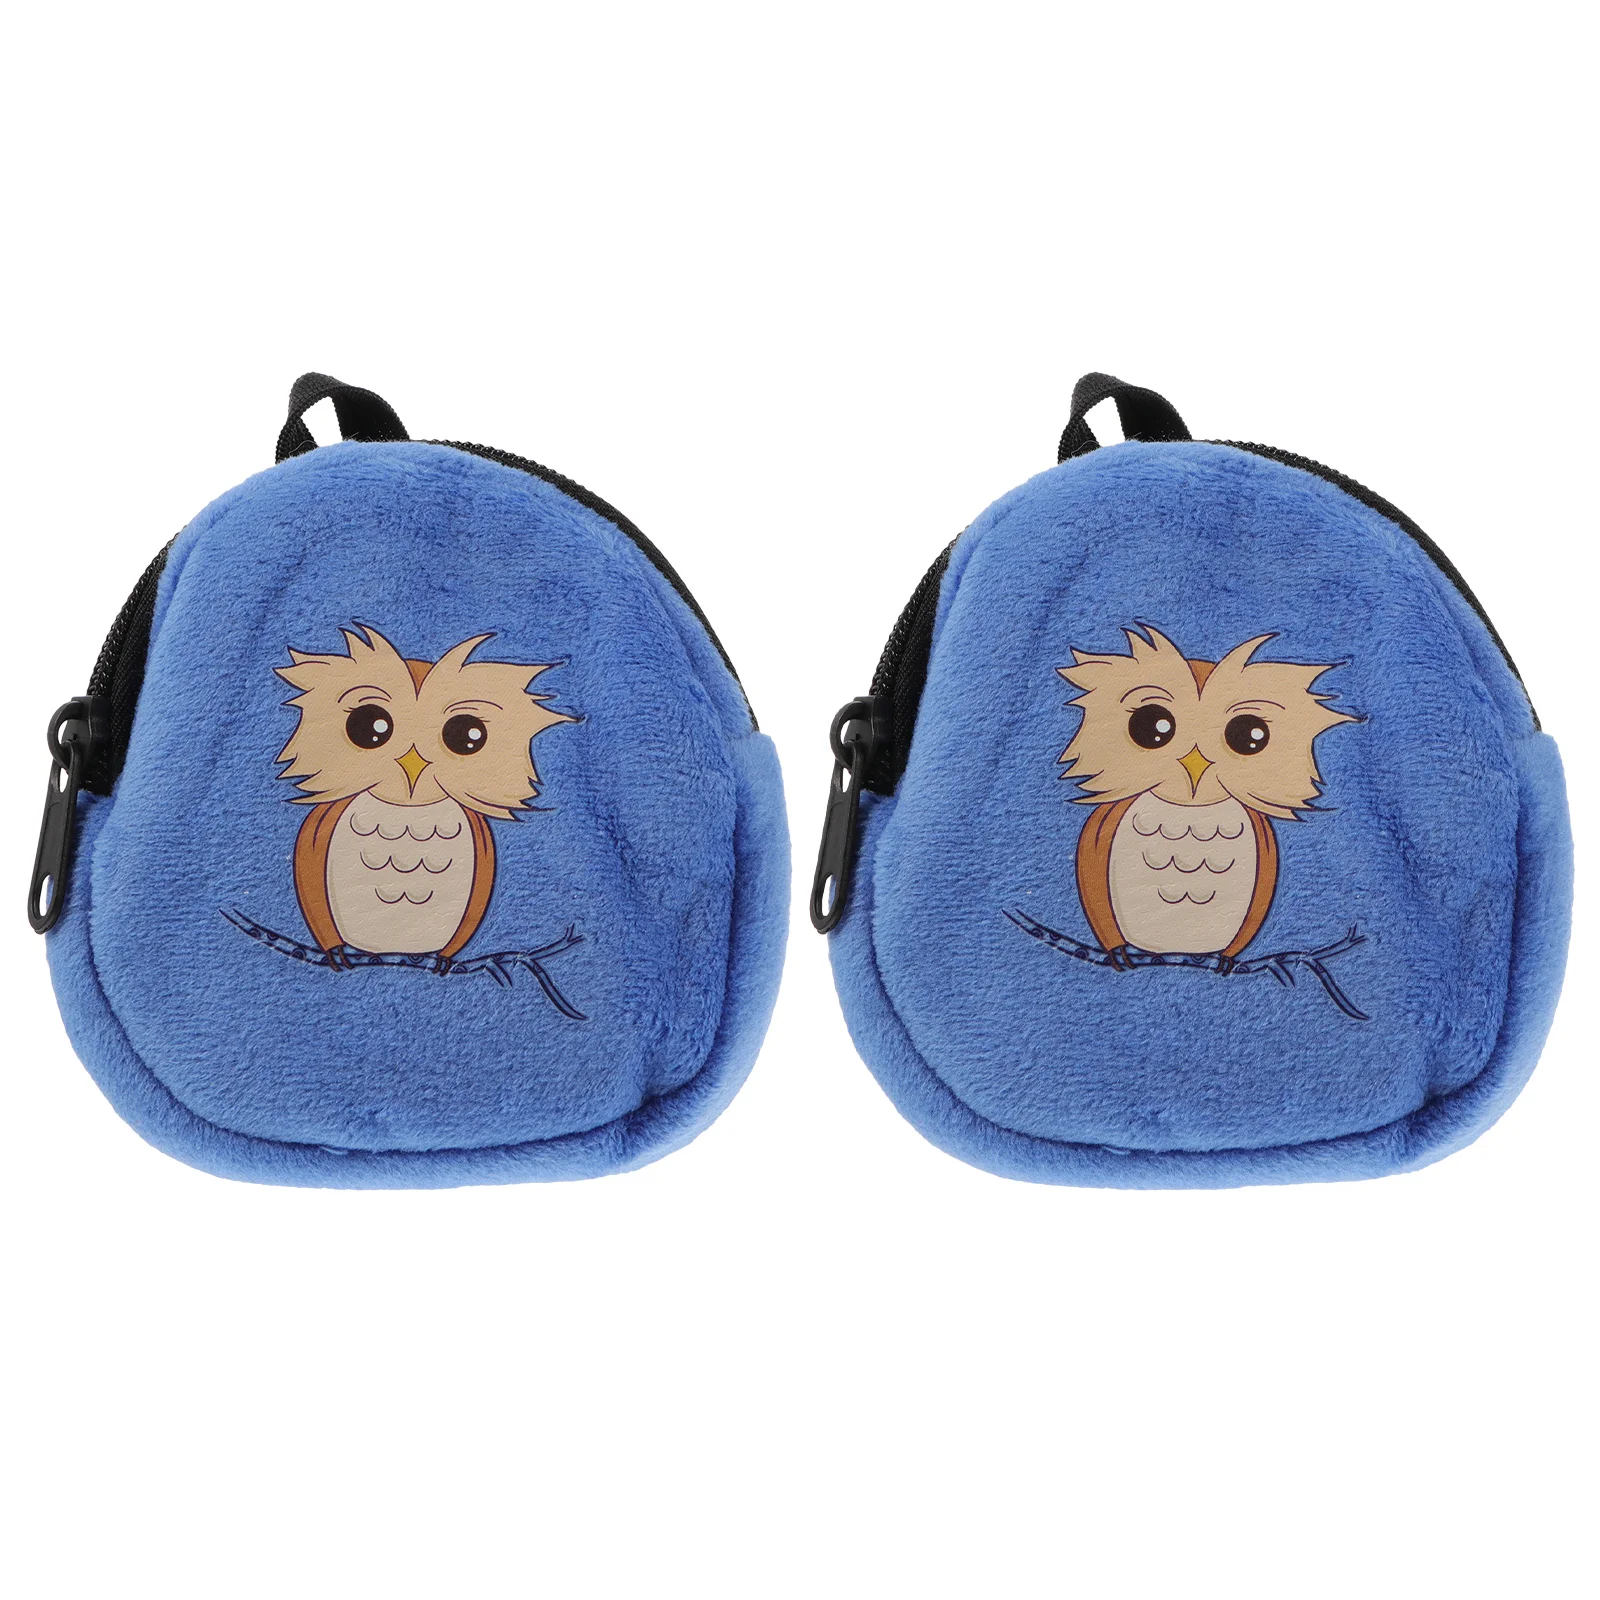 2 Pcs Zipper Accessory Backpack Baby Accessories Baby Accessories Cotton Bag